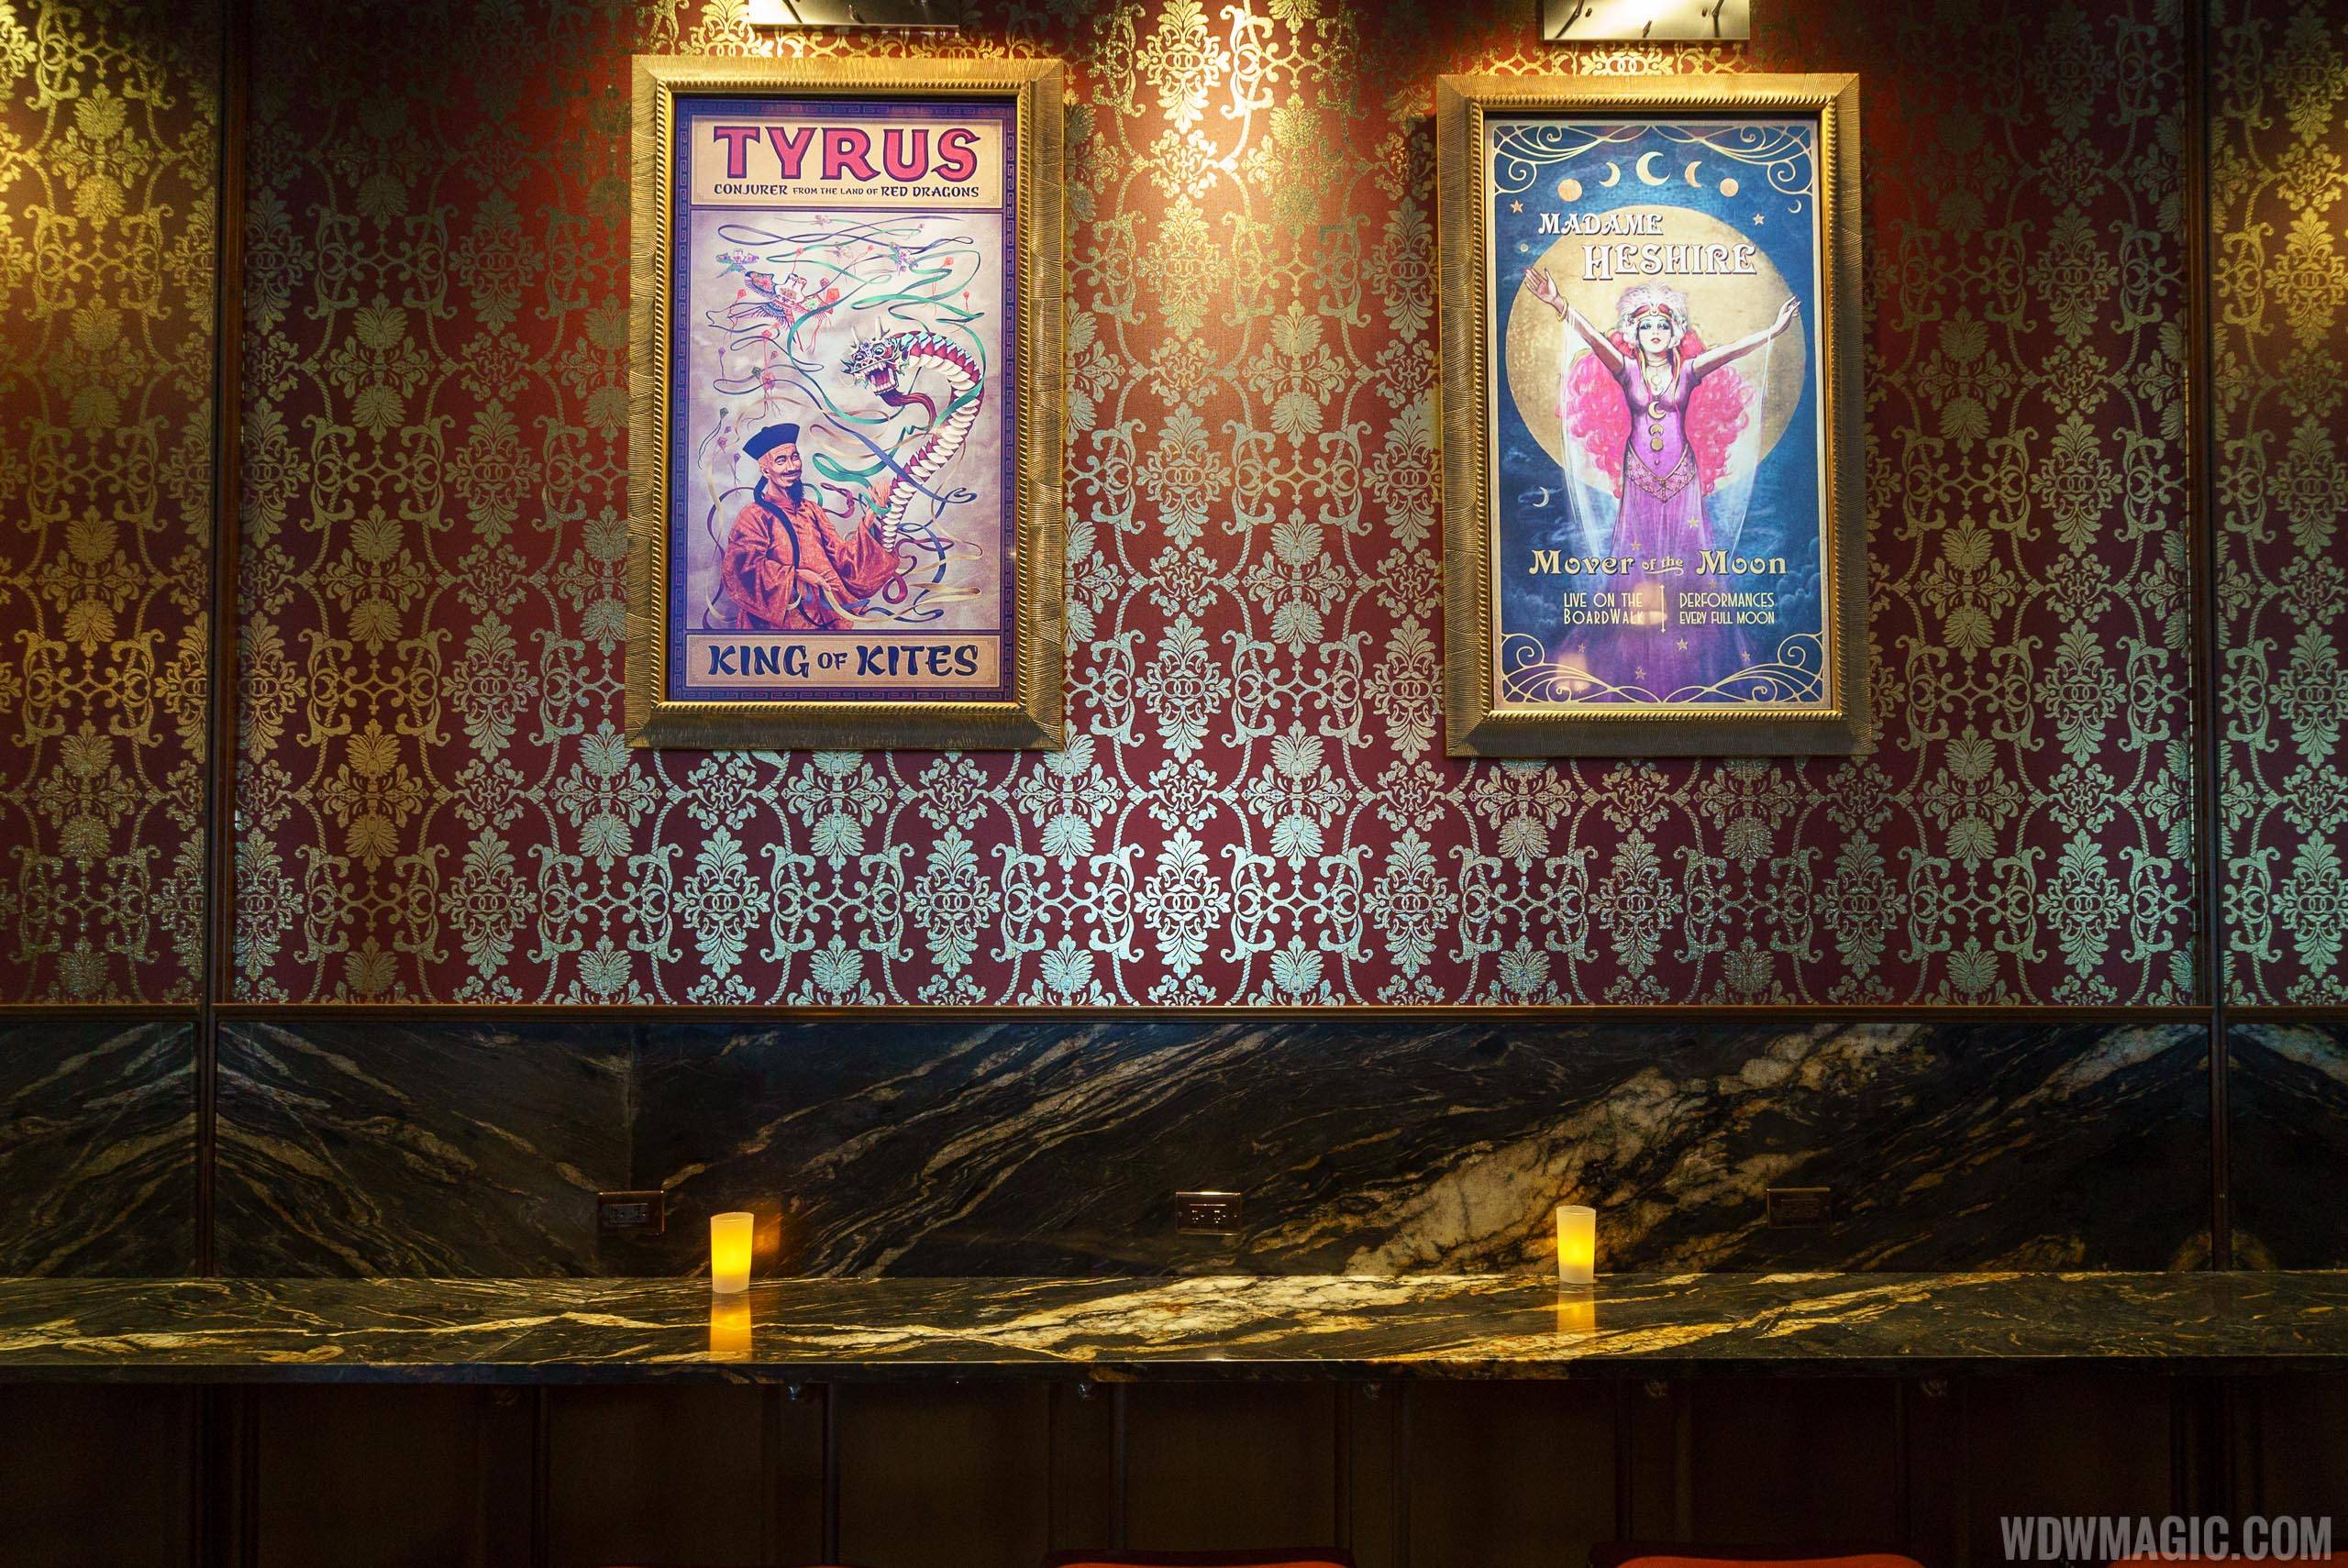 AbracadaBAR counter and enchanted posters